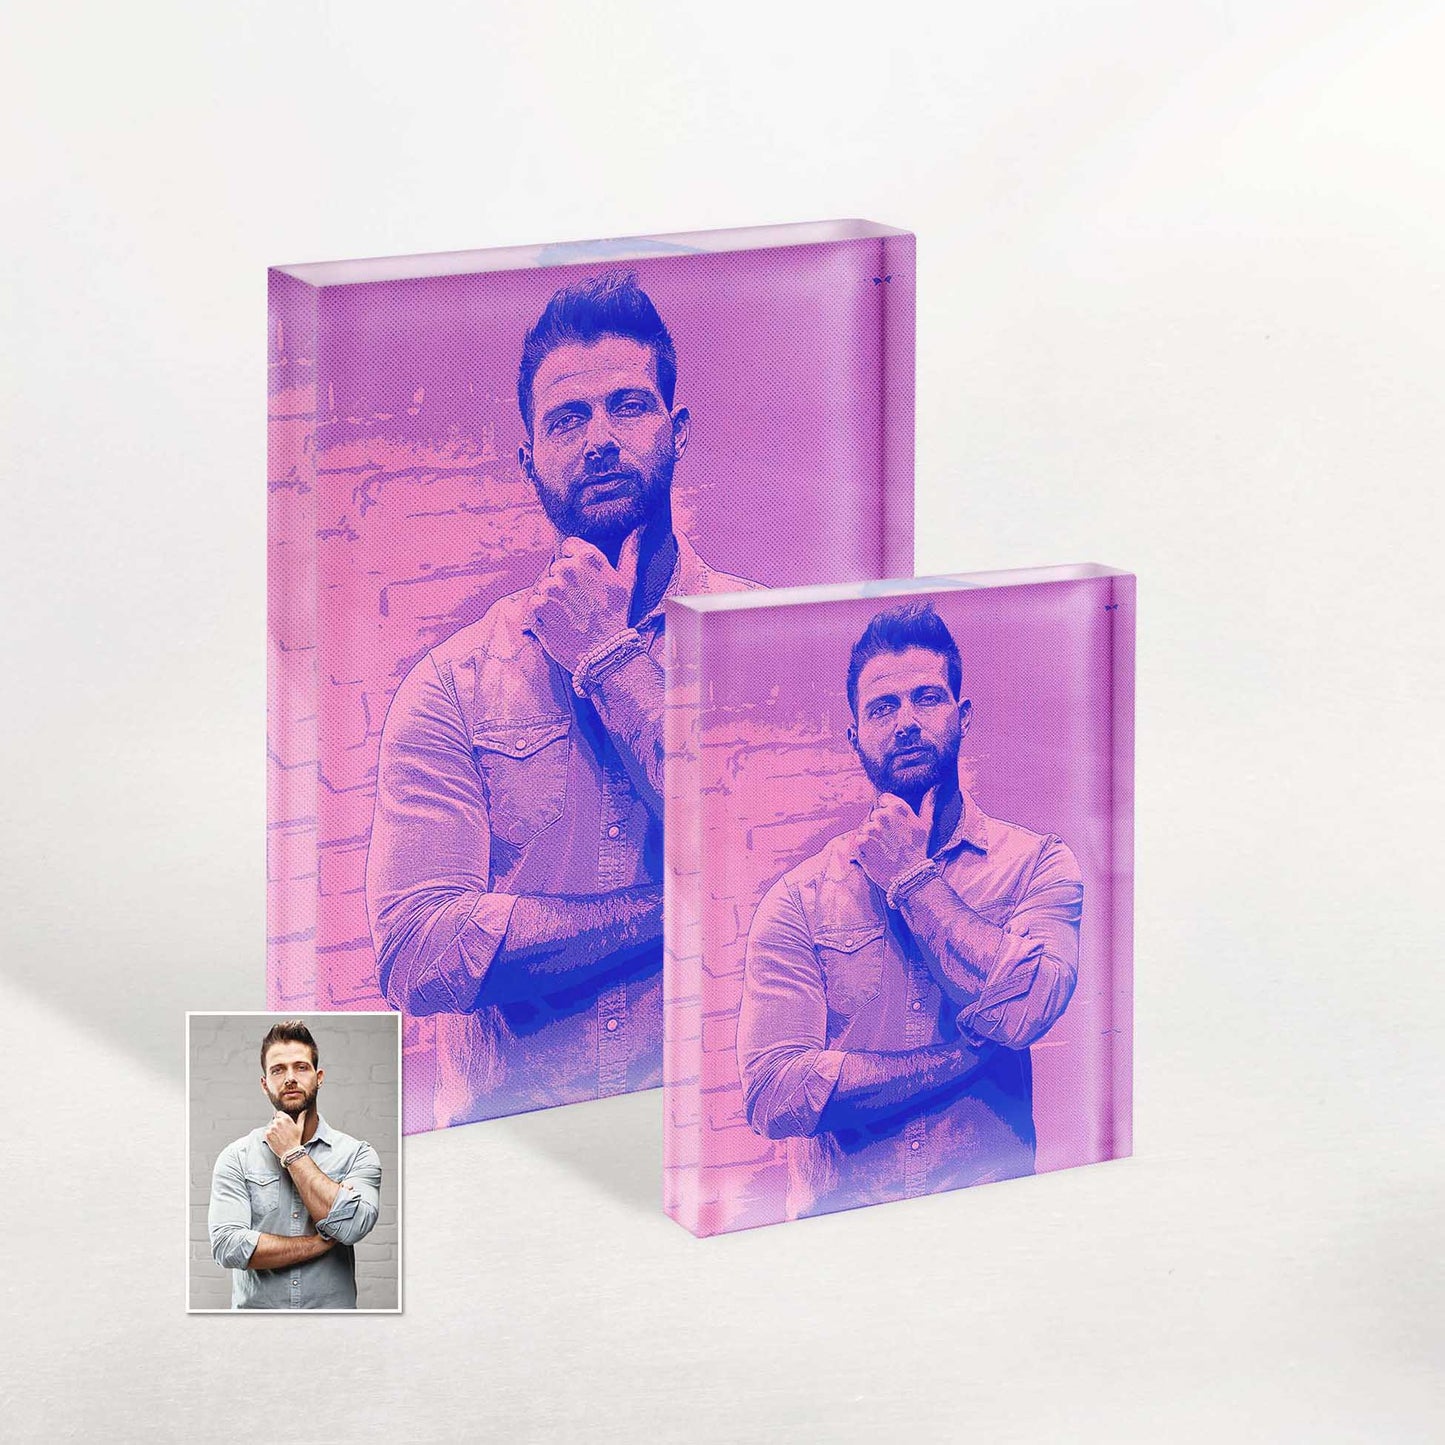 Celebrate your love for all things trendy and cool with our Personalised Purple and Pink Comic Acrylic Block Photo. Its comic cartoon style and vibrant colors bring a unique and original touch to any space, making it a hip and trendy statement piece.